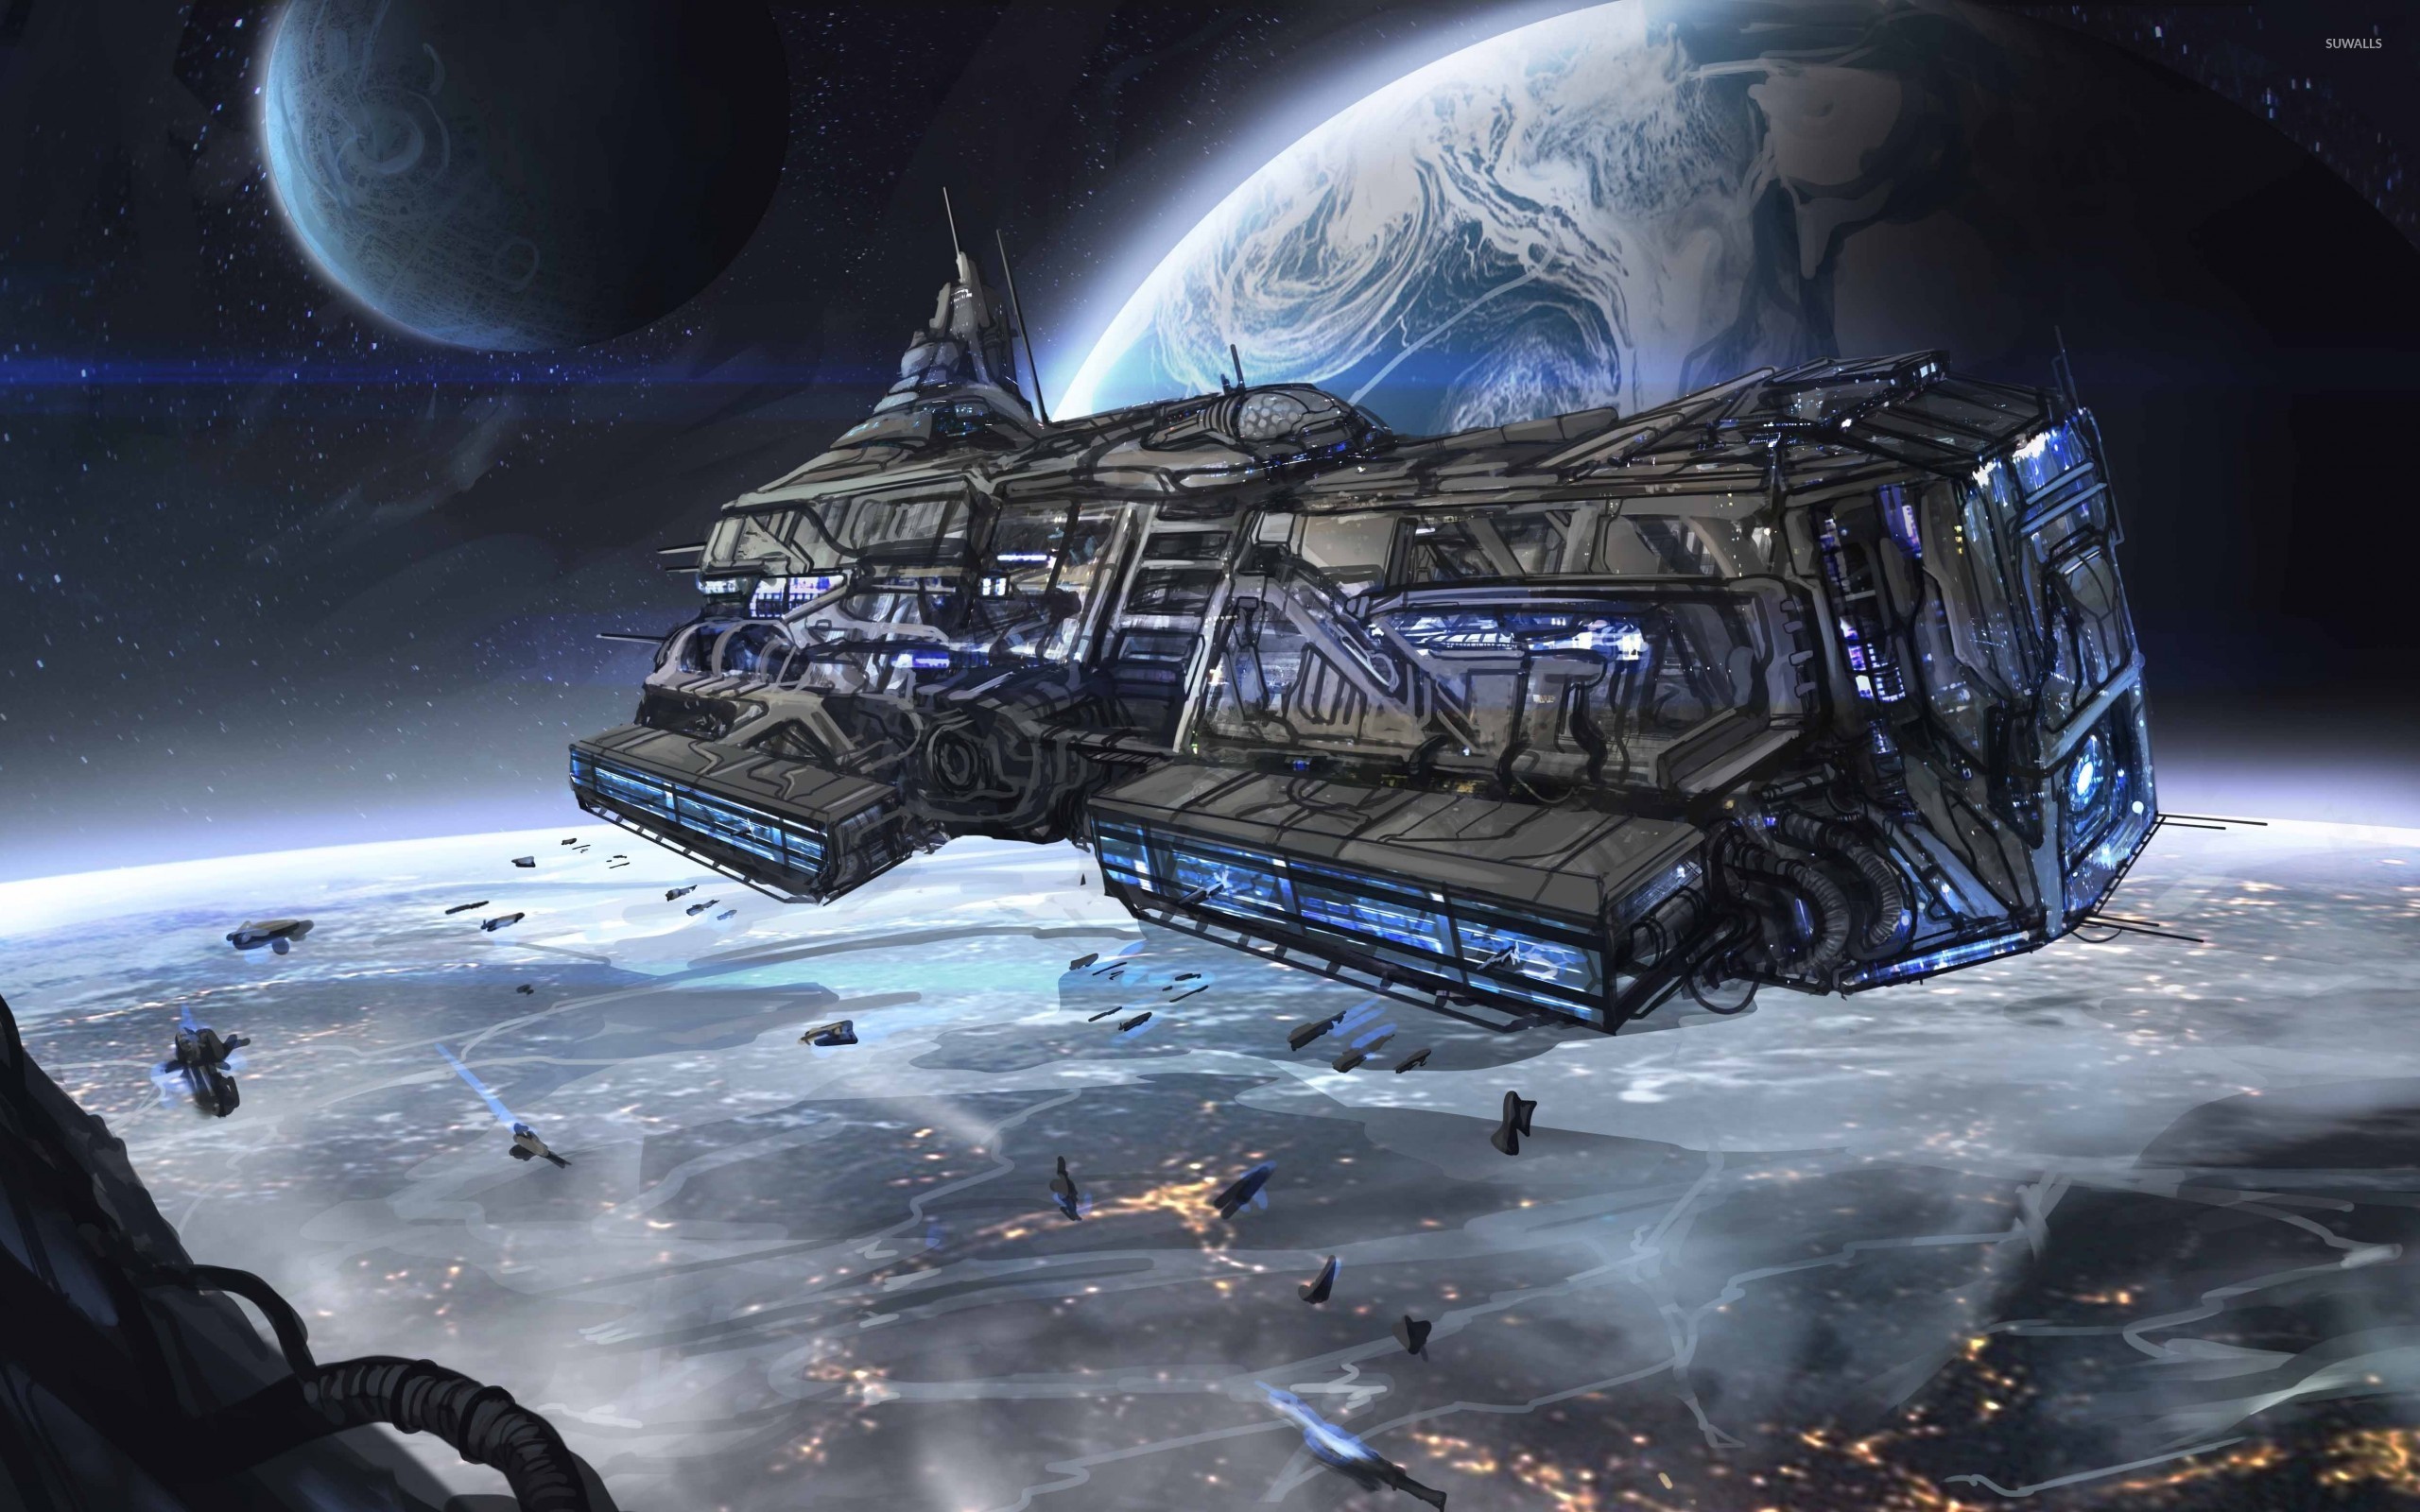 Spaceship [6] Wallpaper - Space Planet City , HD Wallpaper & Backgrounds